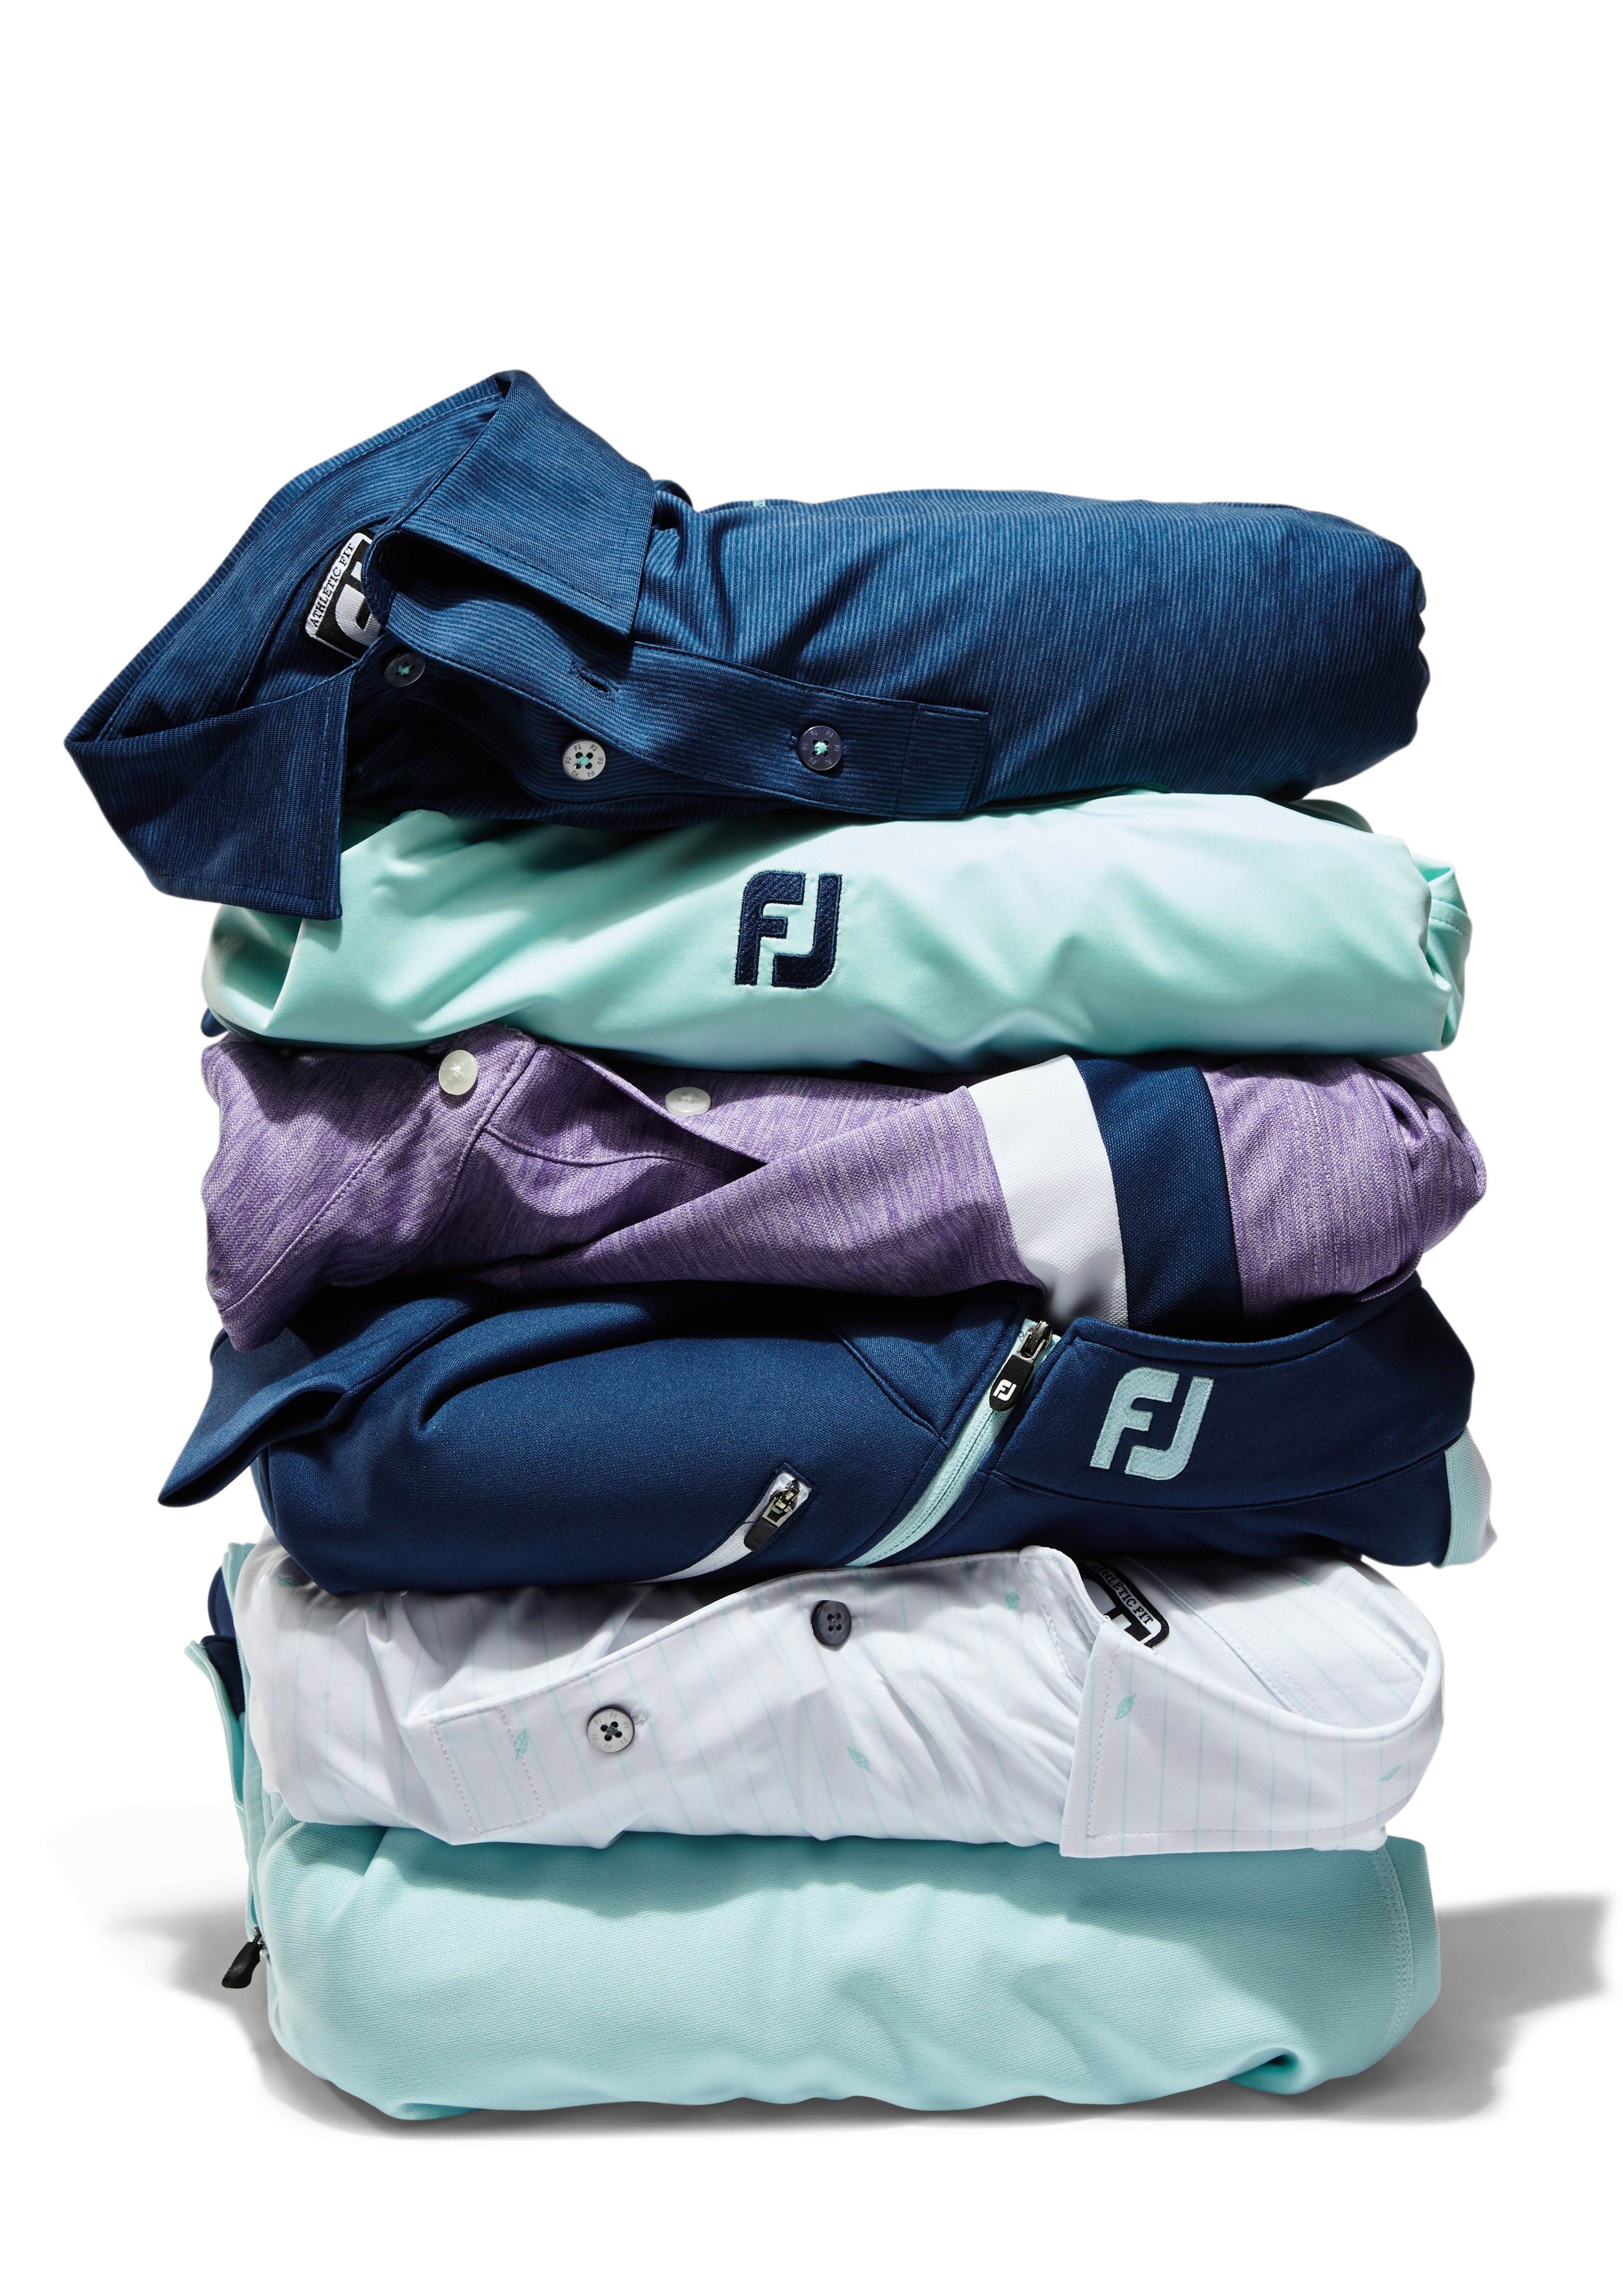 FootJoy launches all-new apparel collections for SS20